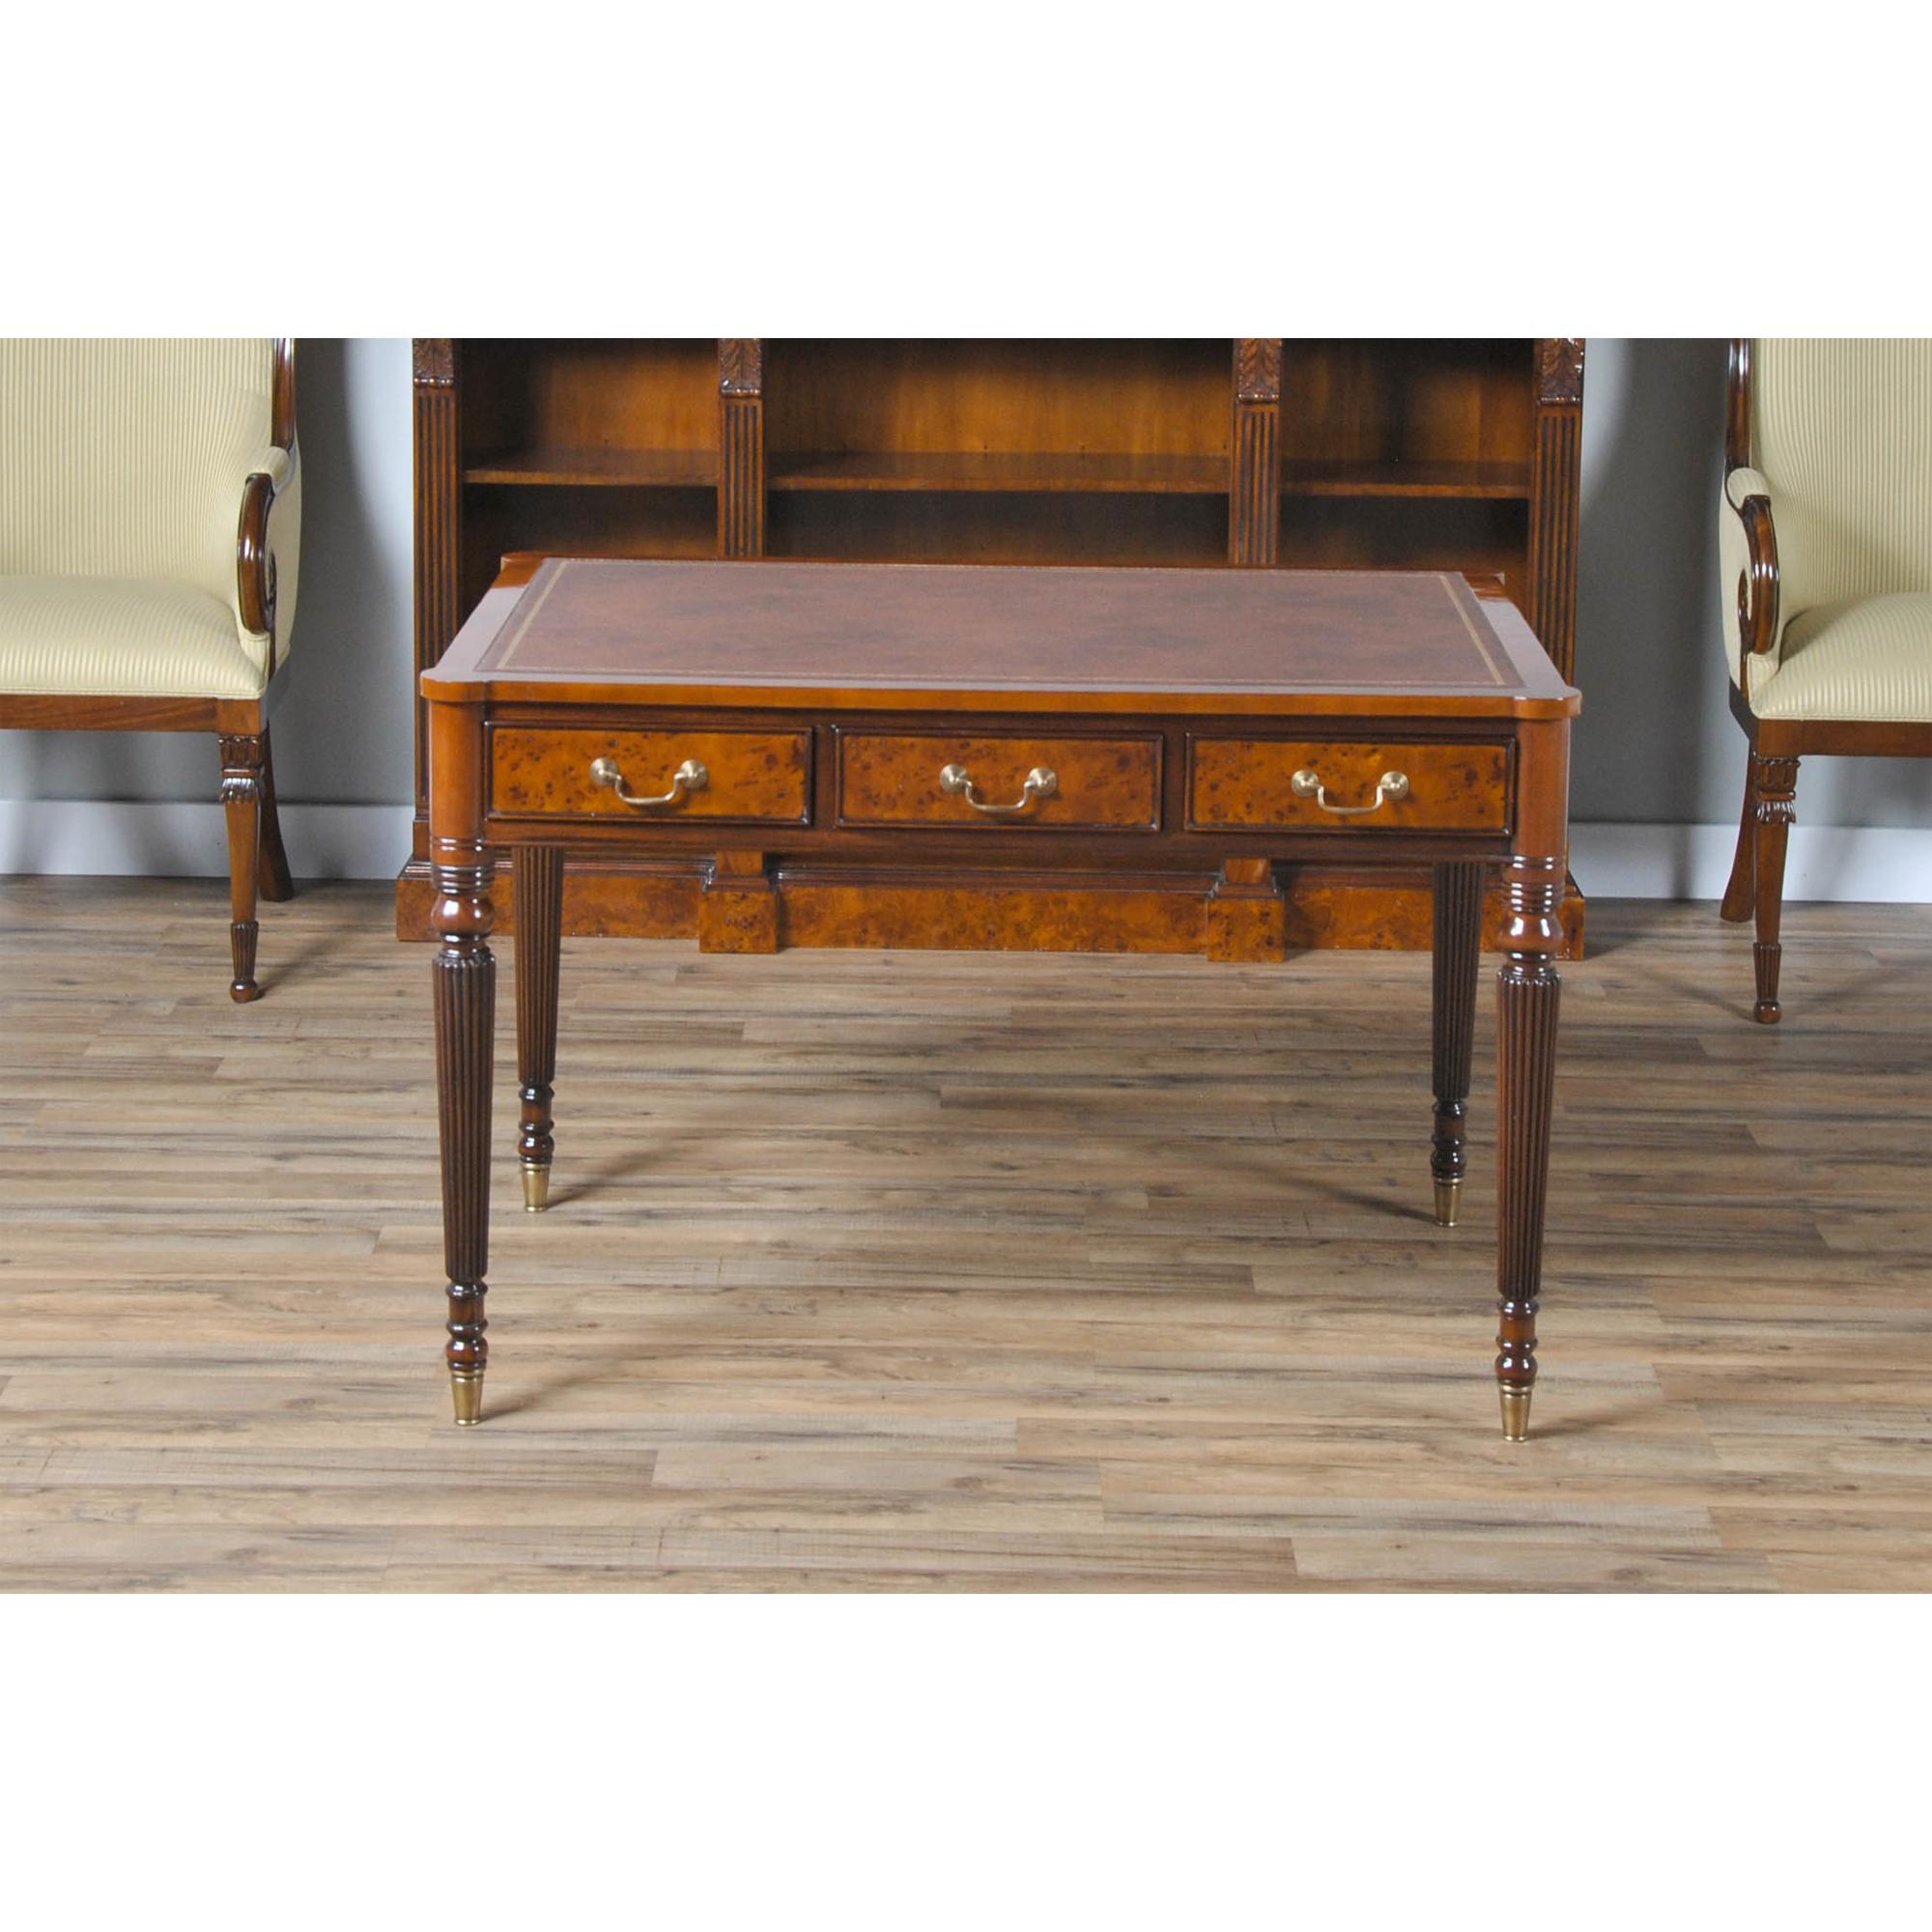 An elegant Burled Writing Table from Niagara Furniture which is perfect either at home or in the work office. Features include a large brown leather tooled top, made from full grain genuine leather, a flat edge profile with cookie cutter corners,